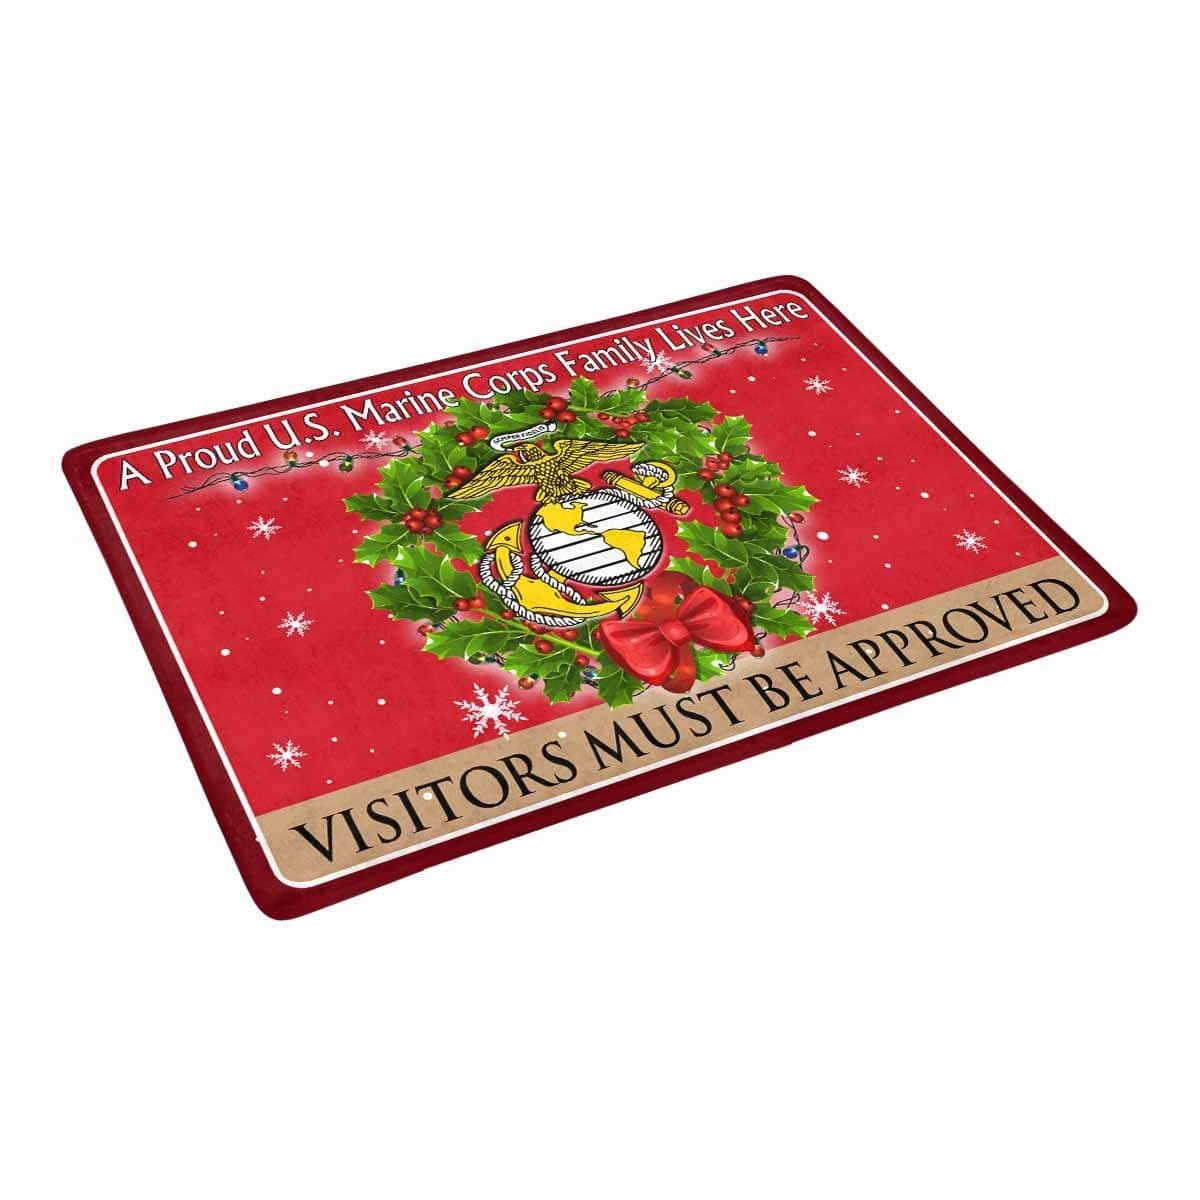 US Marine Corps A Proud Military Family Lives Here - Visitors must be approved-Doormat-USMC-Logo-Veterans Nation